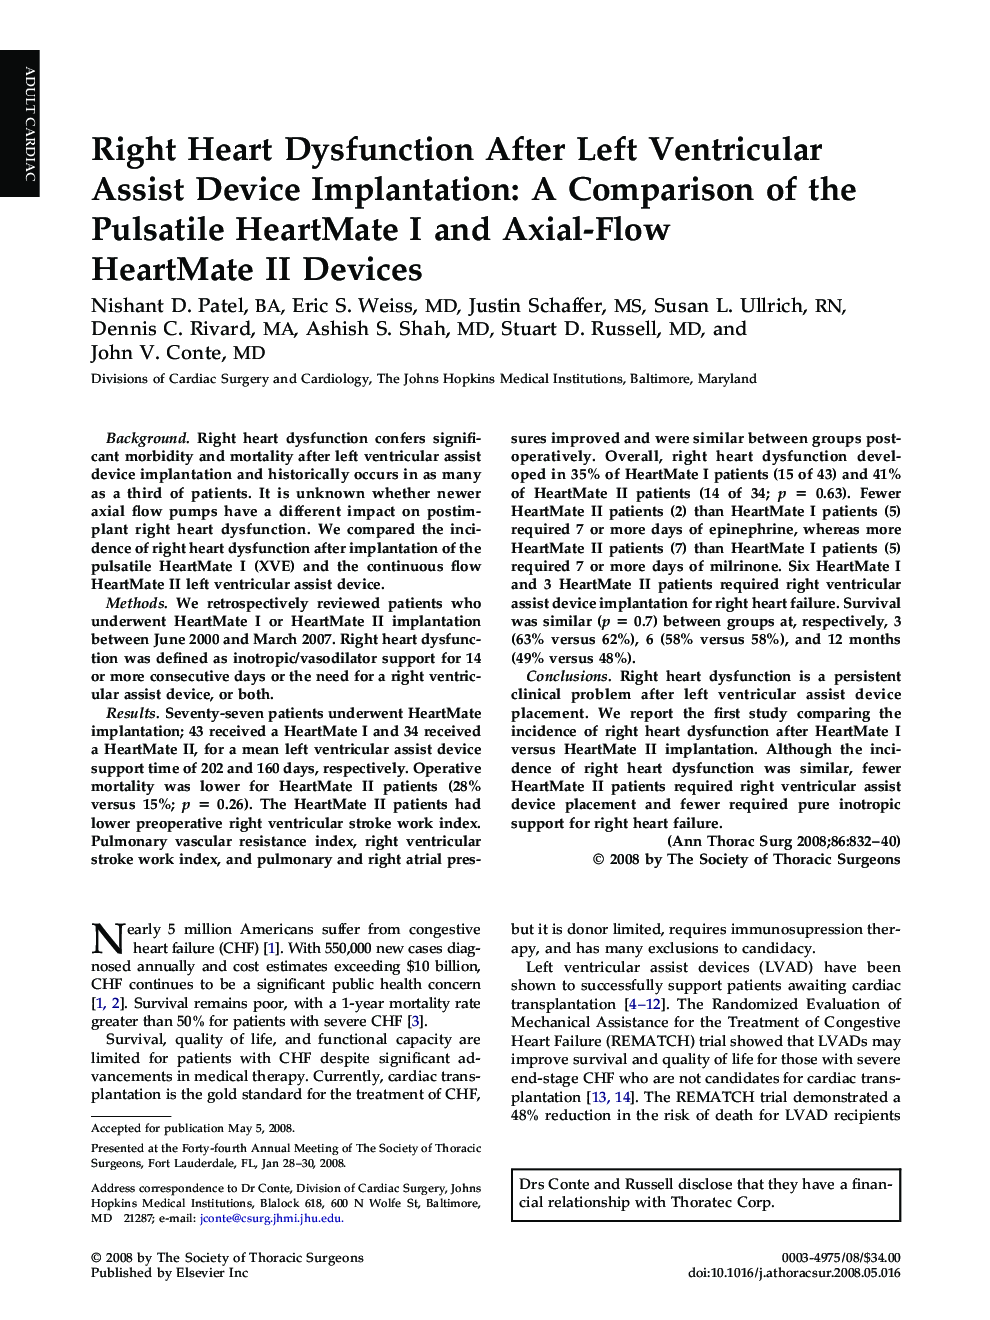 Right Heart Dysfunction After Left Ventricular Assist Device Implantation: A Comparison of the Pulsatile HeartMate I and Axial-Flow HeartMate II Devices